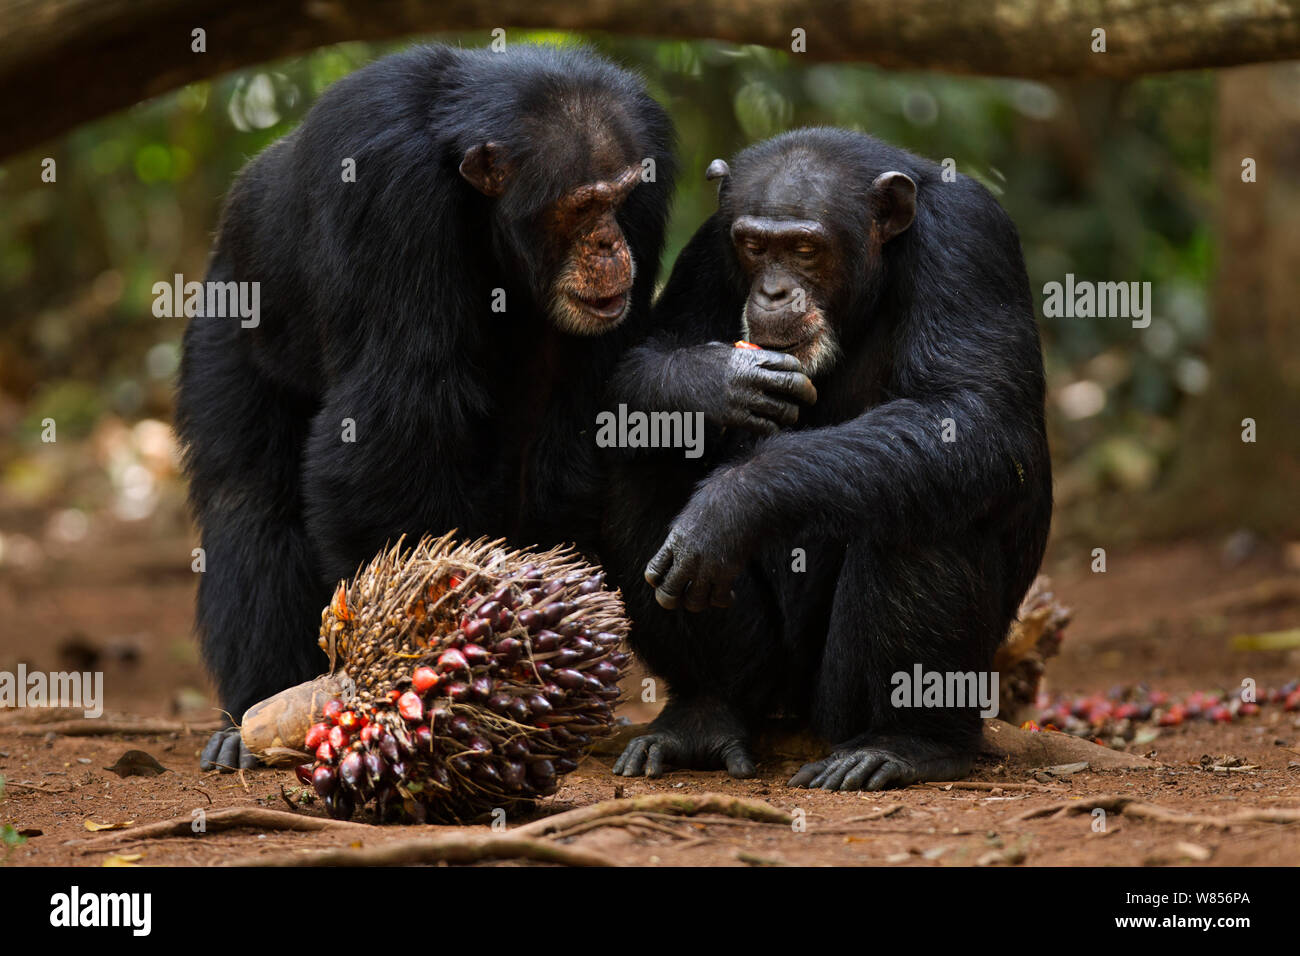 Western chimpanzee (Pan troglodytes verus)   alpha male 'Foaf' aged 30 years looking curiously at female 'Jire' aged 52 years as she feeds on palm oil fruits, Bossou Forest, Mont Nimba, Guinea. January 2011. Stock Photo